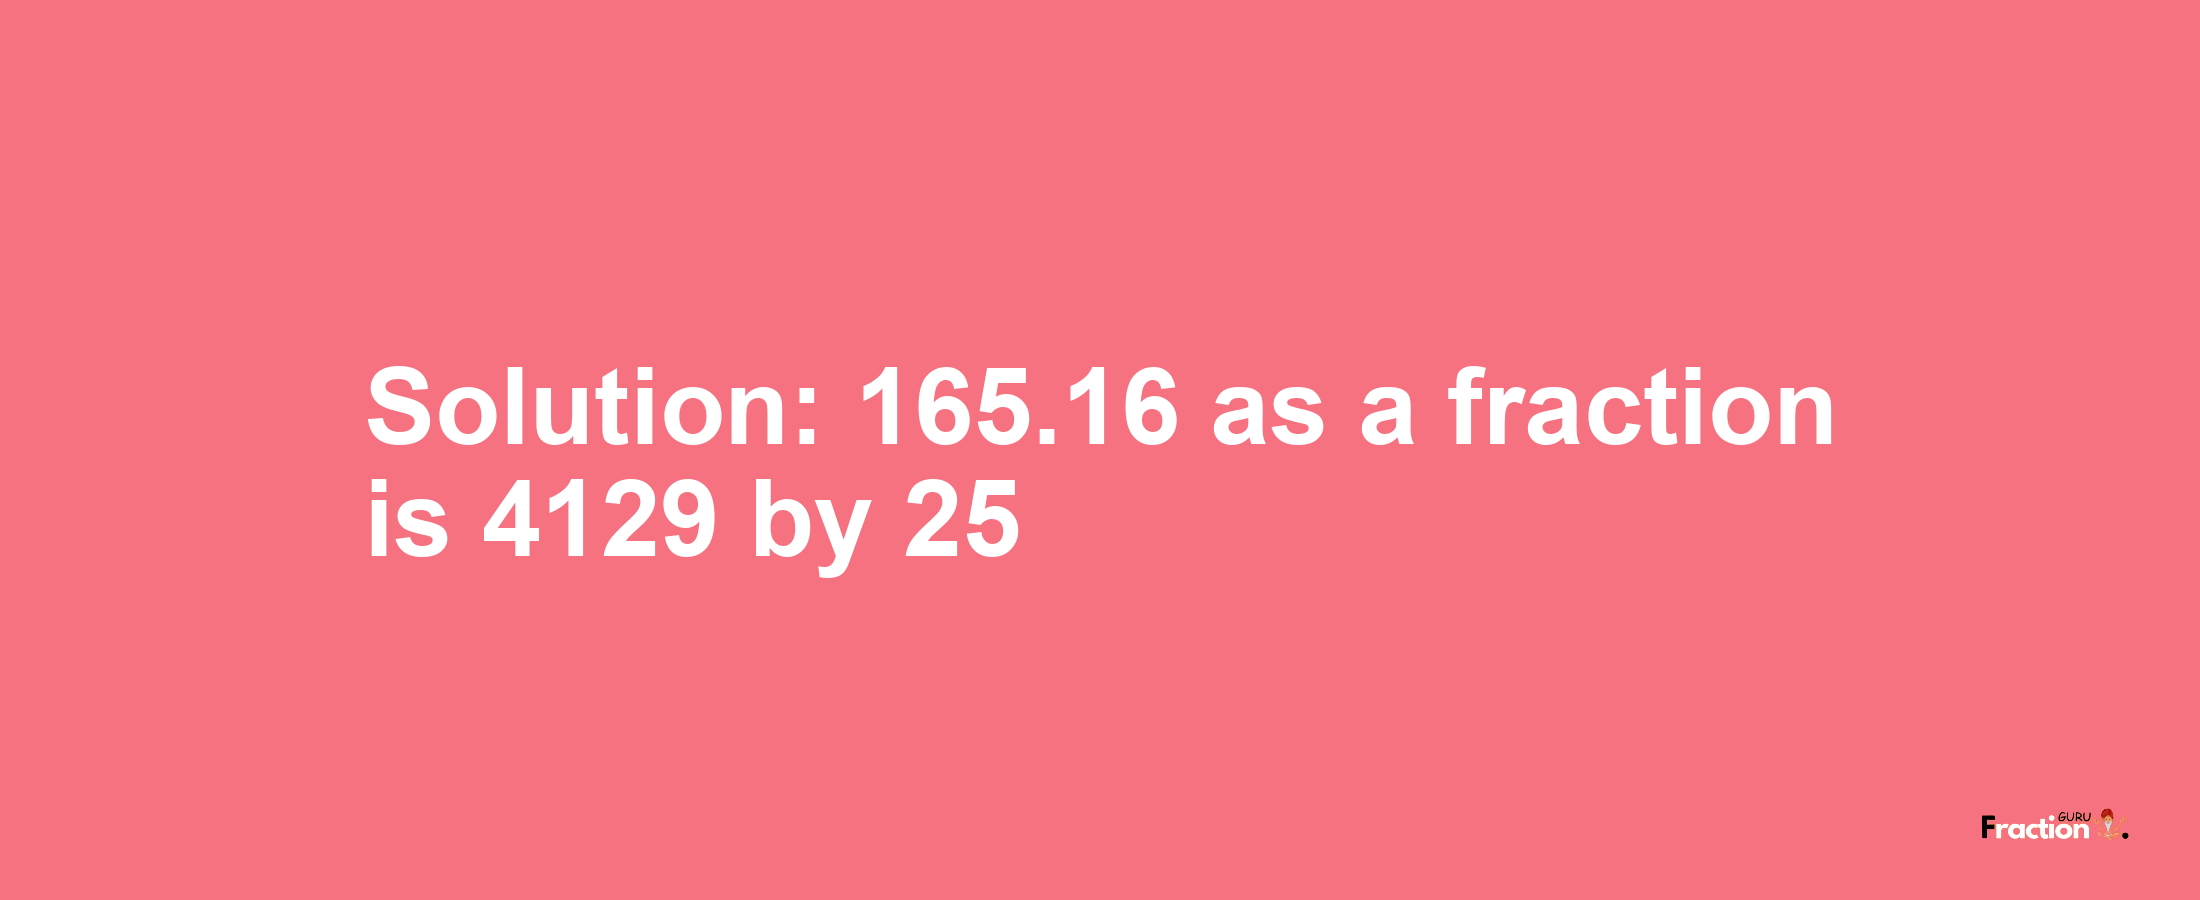 Solution:165.16 as a fraction is 4129/25